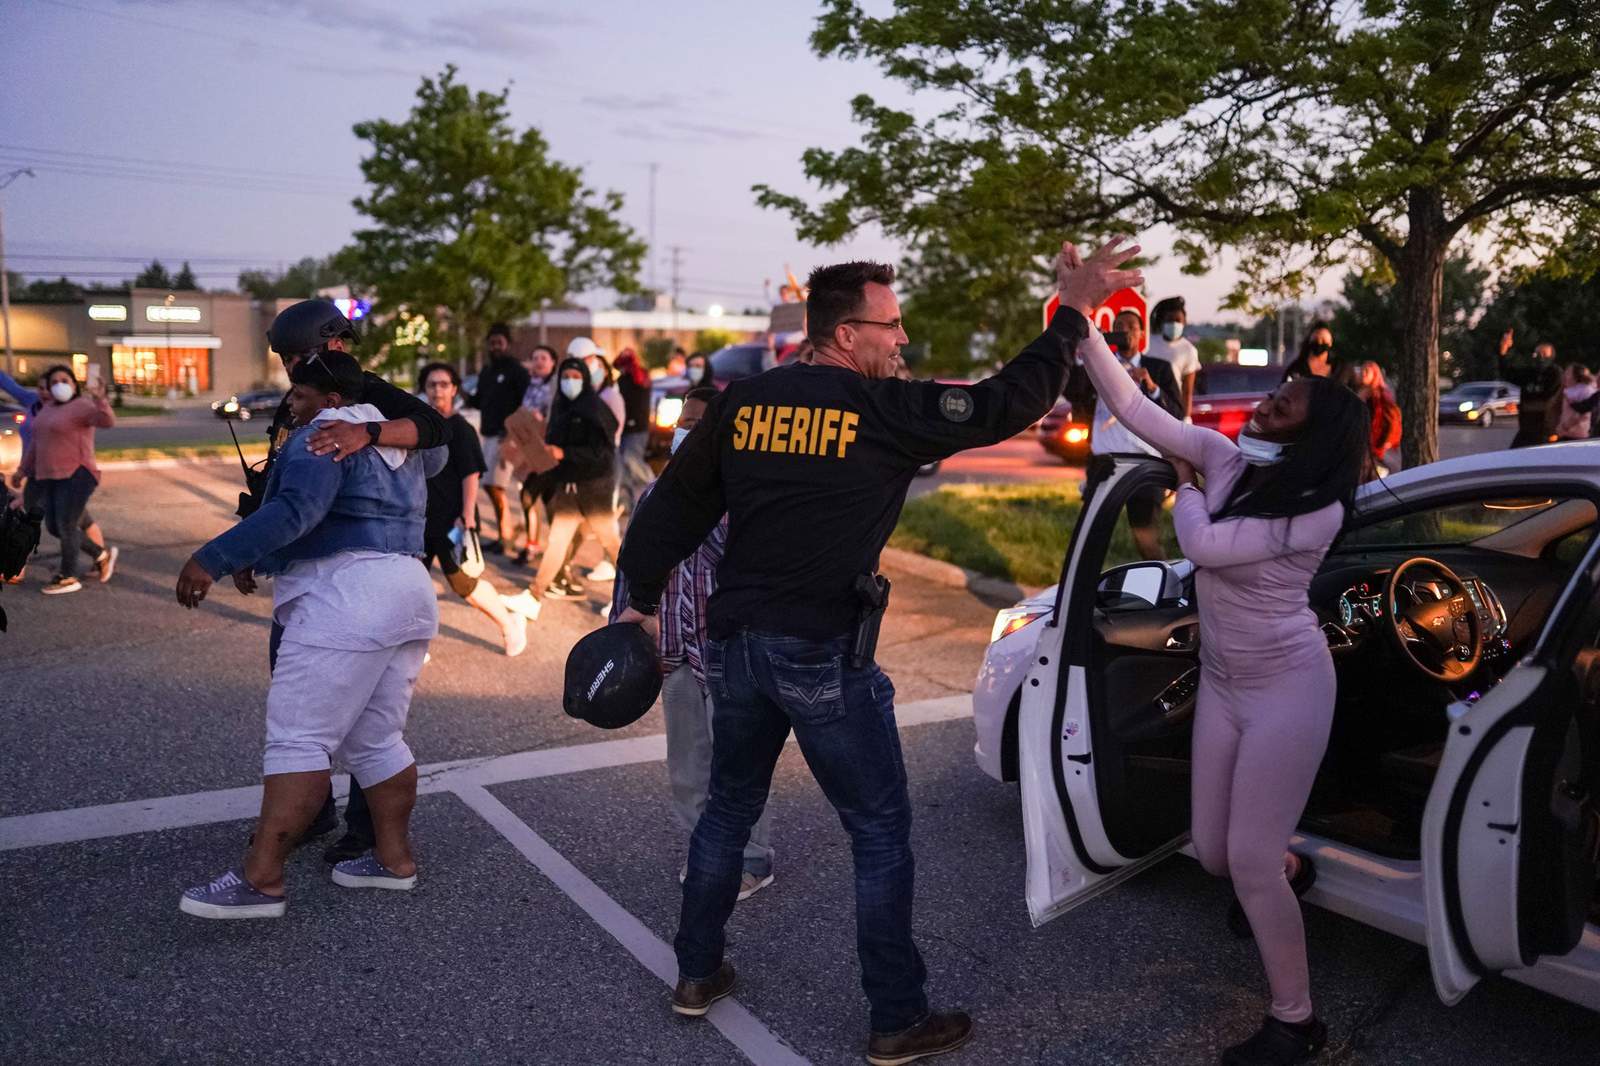 A sheriff put down his baton to listen to protesters. They chanted walk with us, so he did.